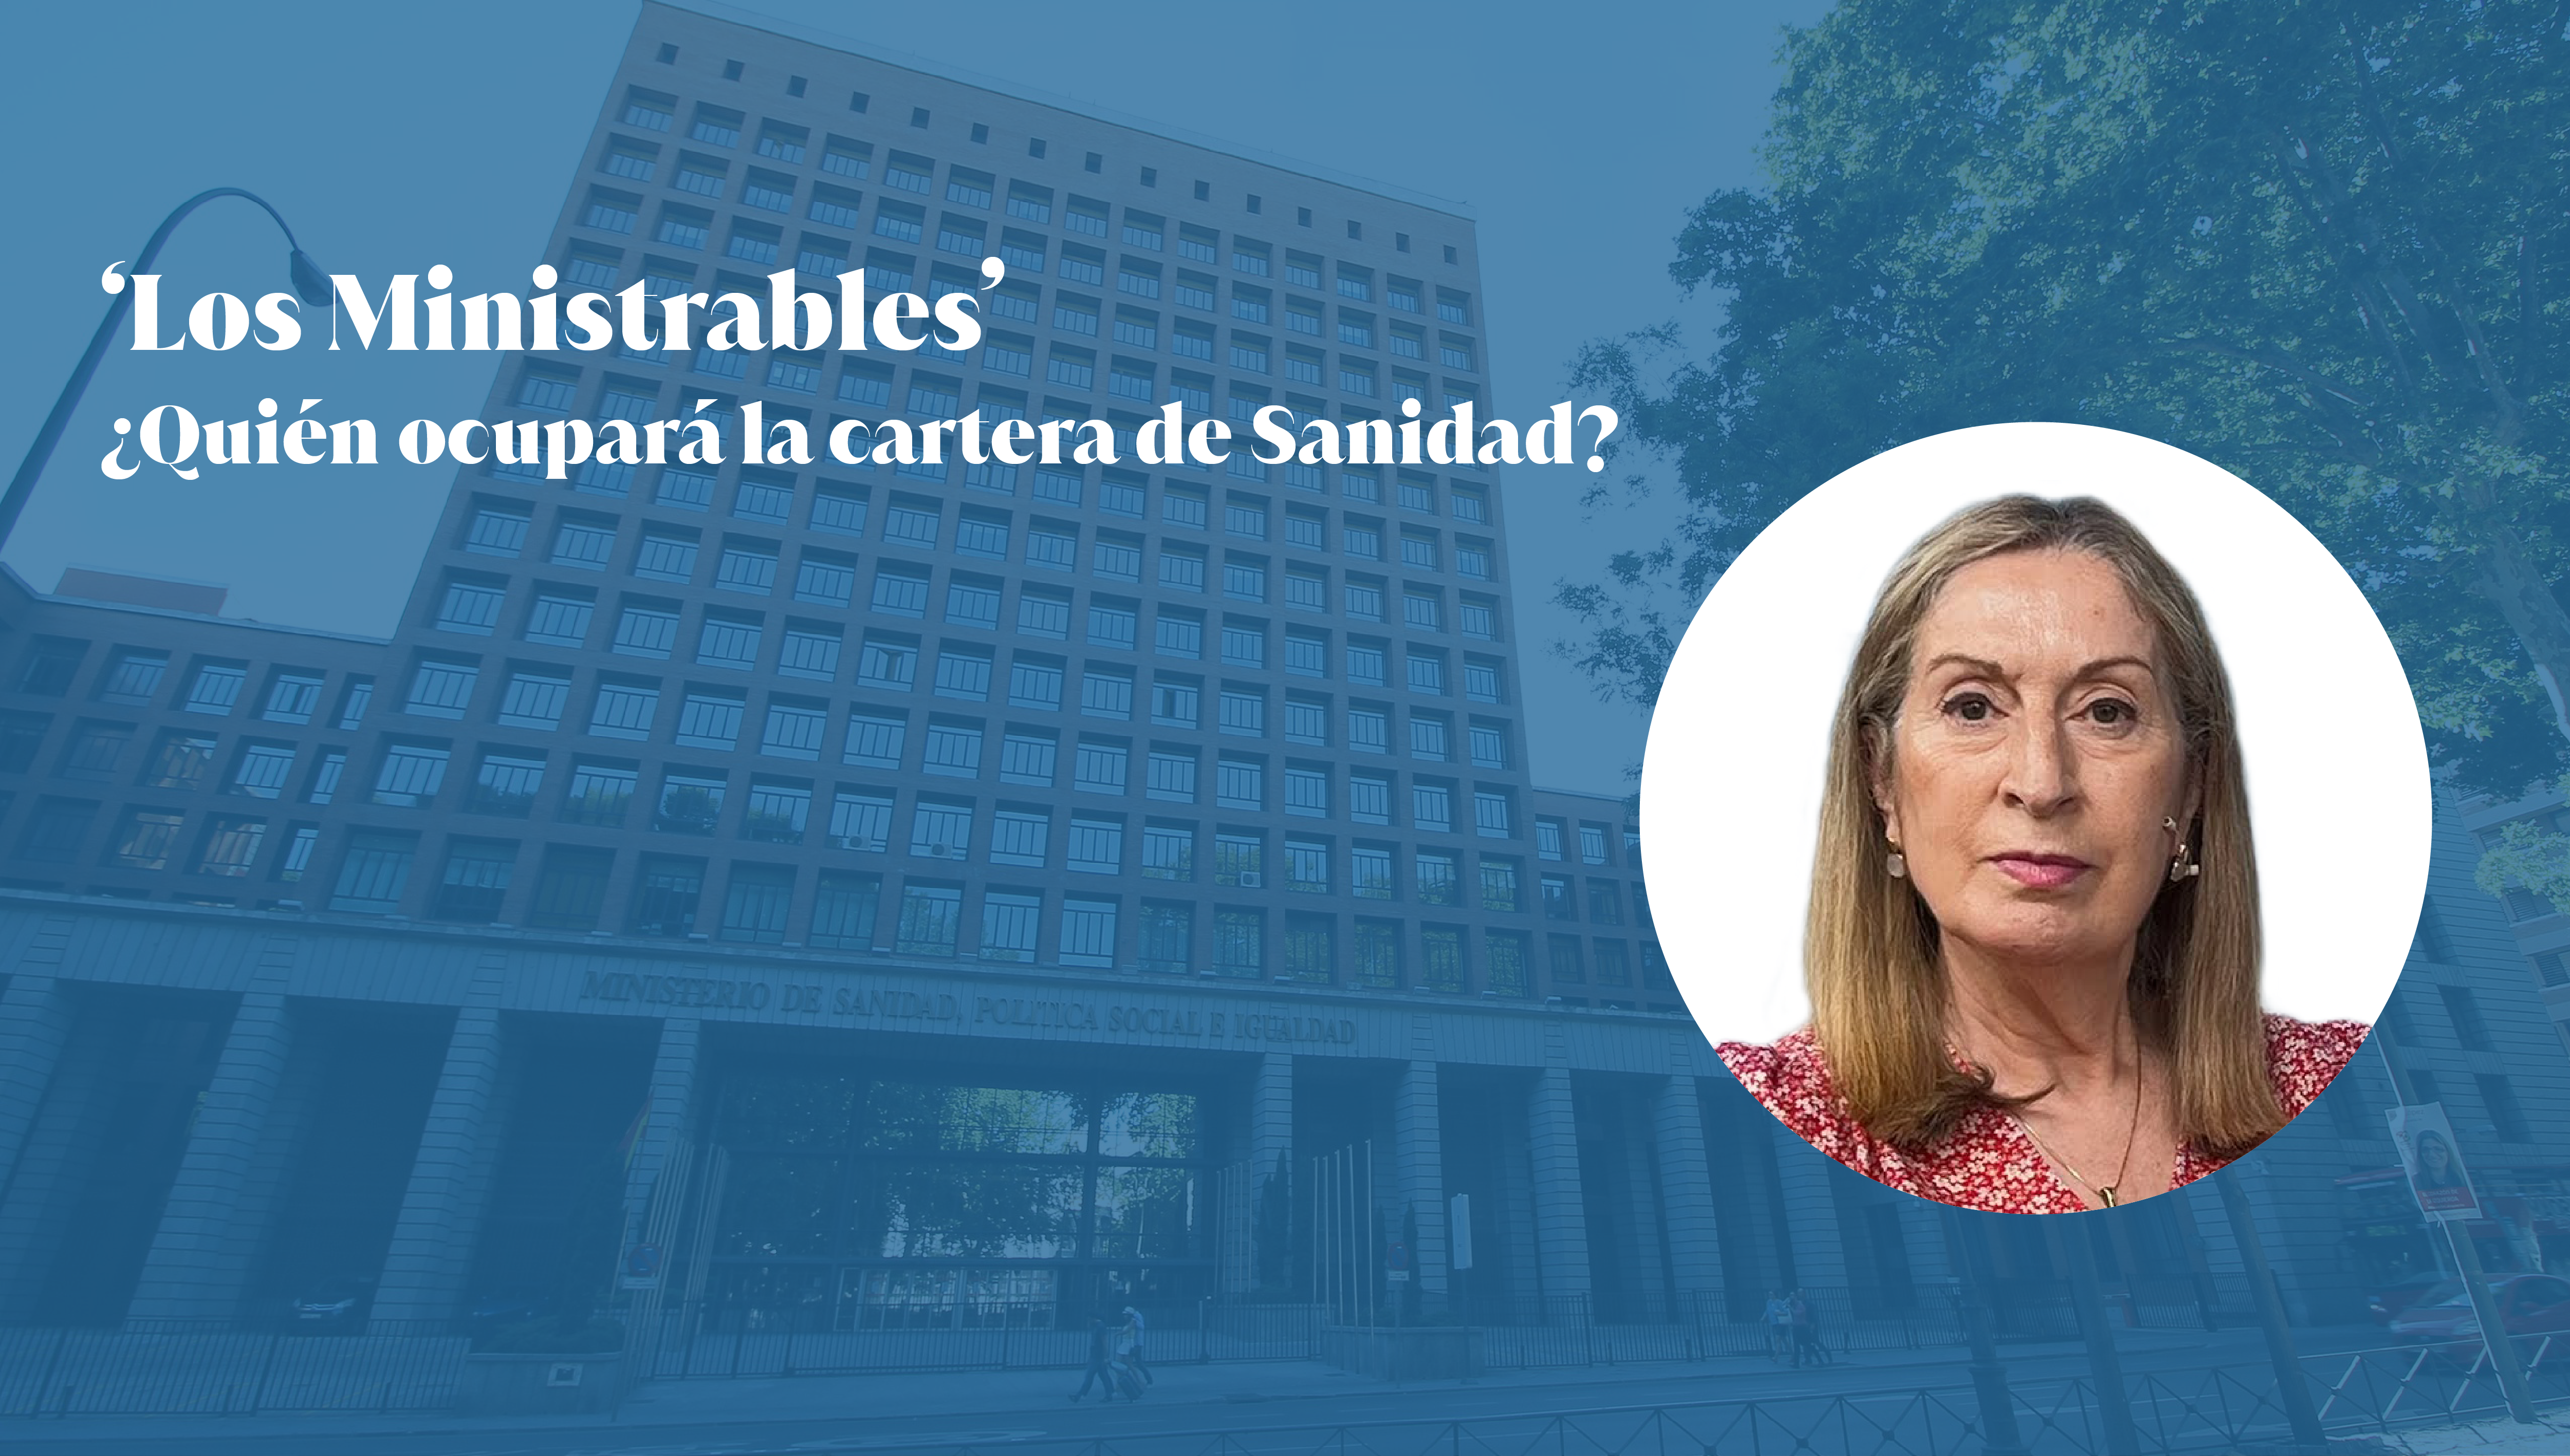 Los 'Ministrables': Ana Pastor